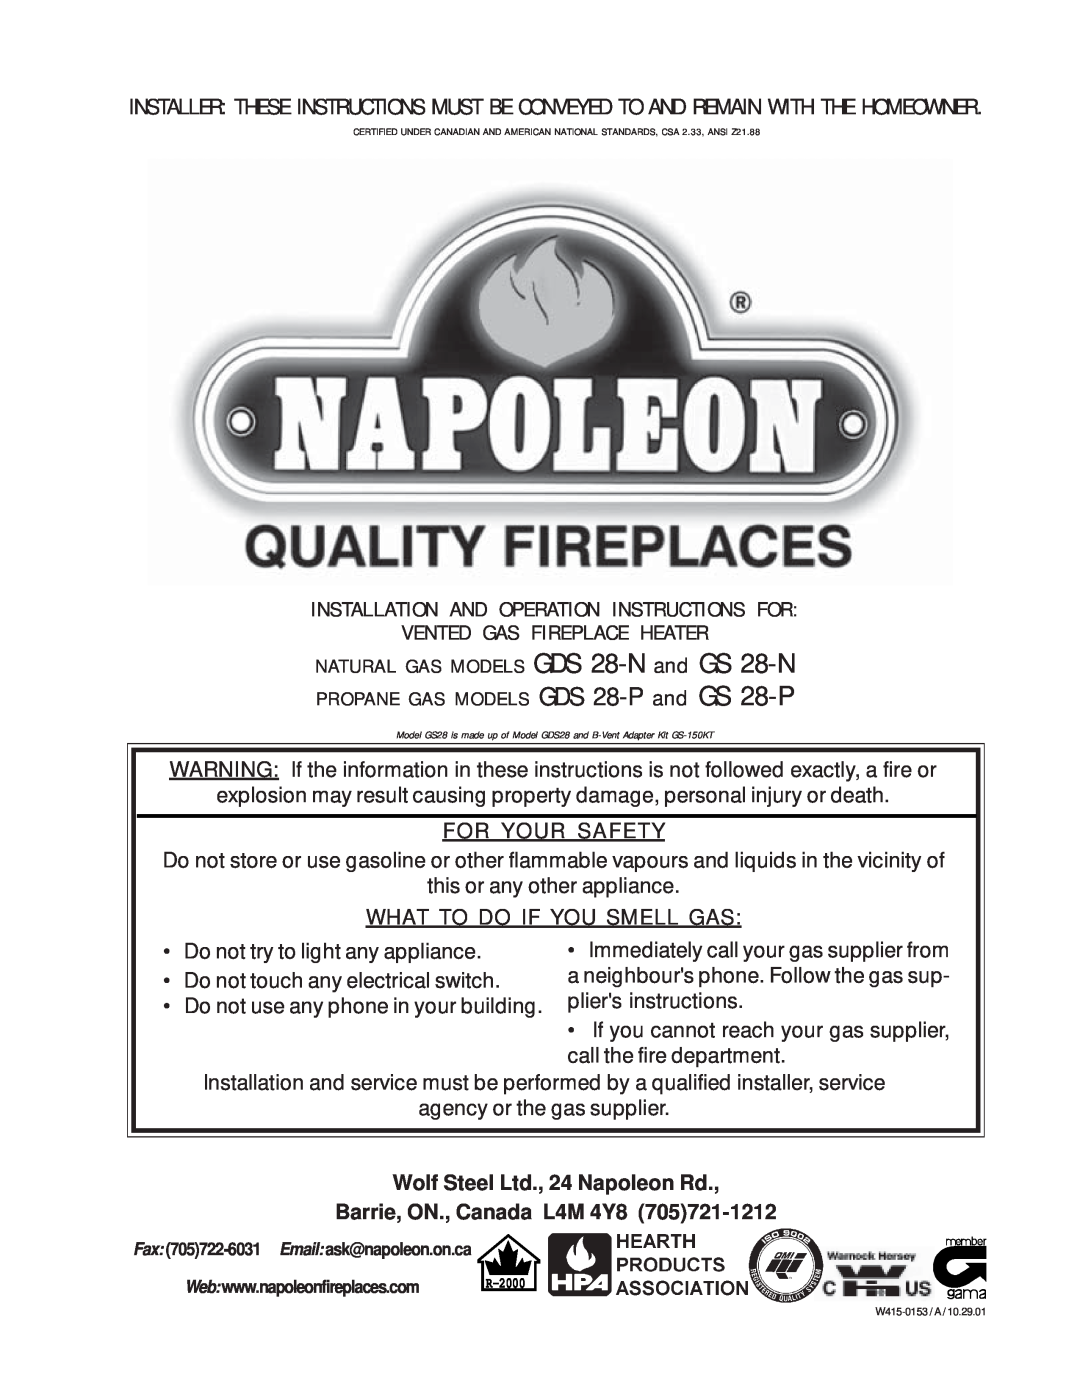 Napoleon Fireplaces GDS 28-N, GS 28-P manual For Your Safety, What To Do If You Smell Gas, Barrie, ON., Canada L4M 4Y8 